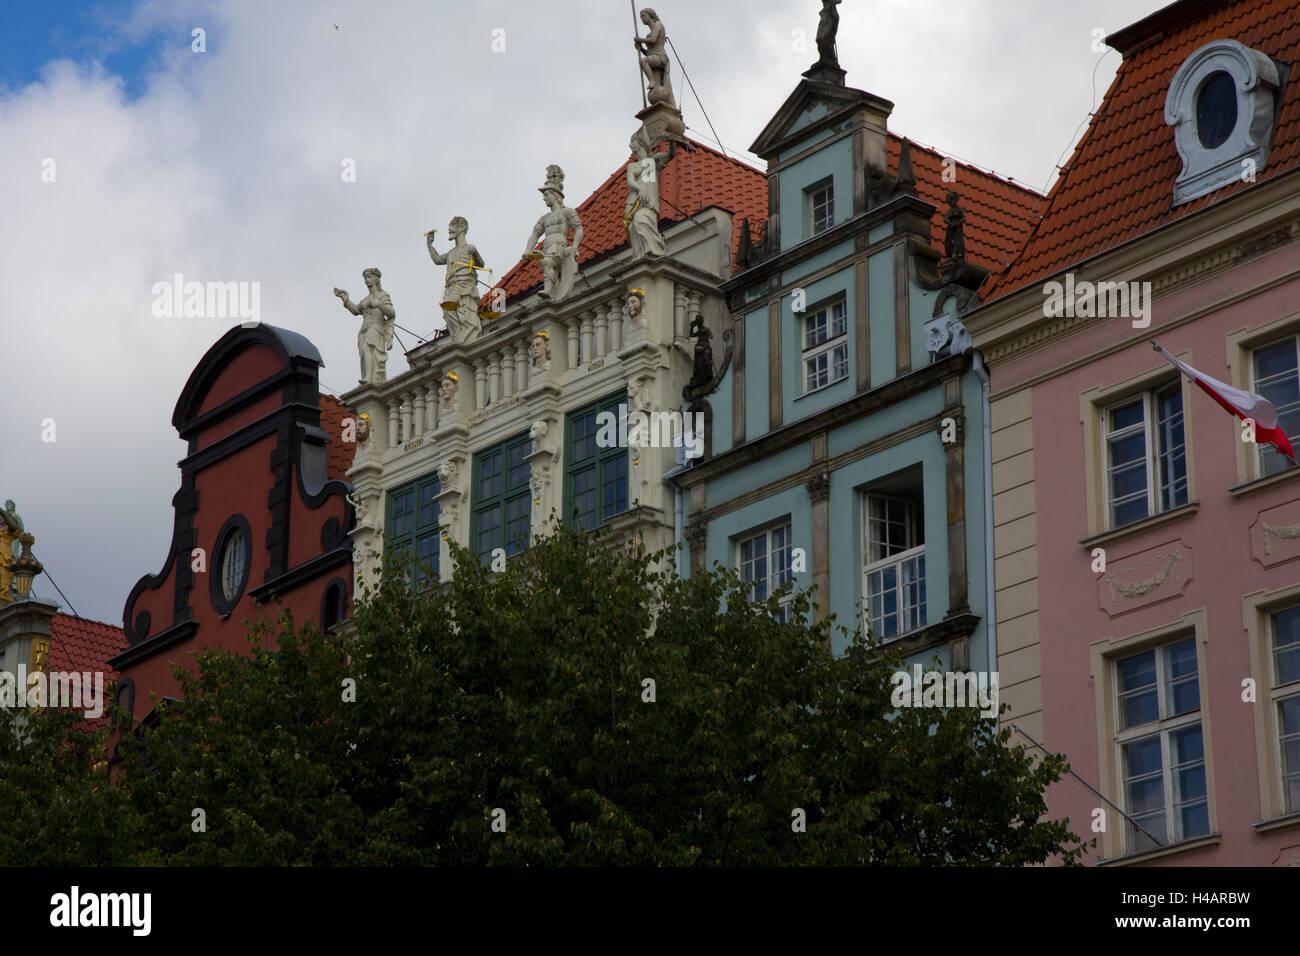 Magnificent buildings of mixed Gothic, Baroque and Renaissaince style, dating to the Middle Ages, on Dluga Street, Gdansk Stock Photo